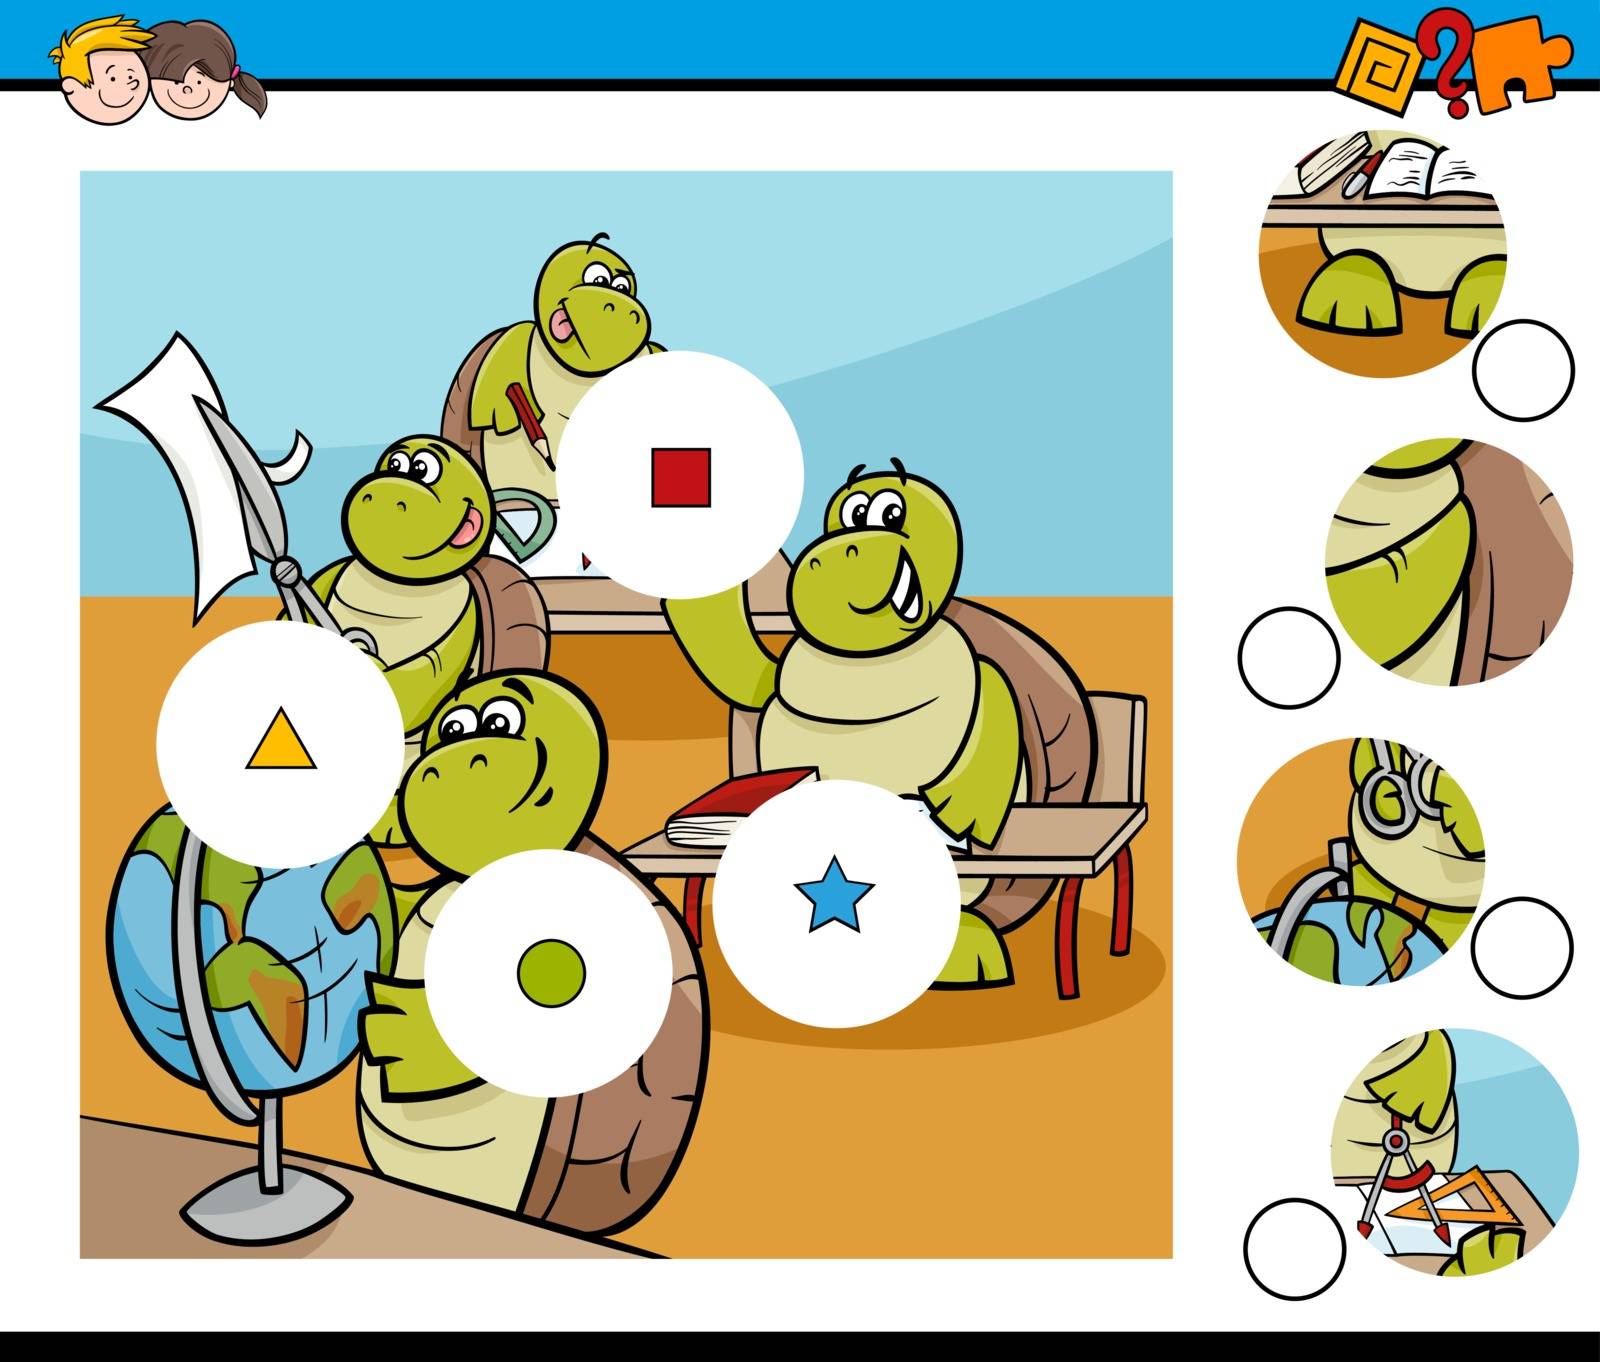 Cartoon Illustration of Educational Match the Elements Game for Children with Turtle Pupil Characters